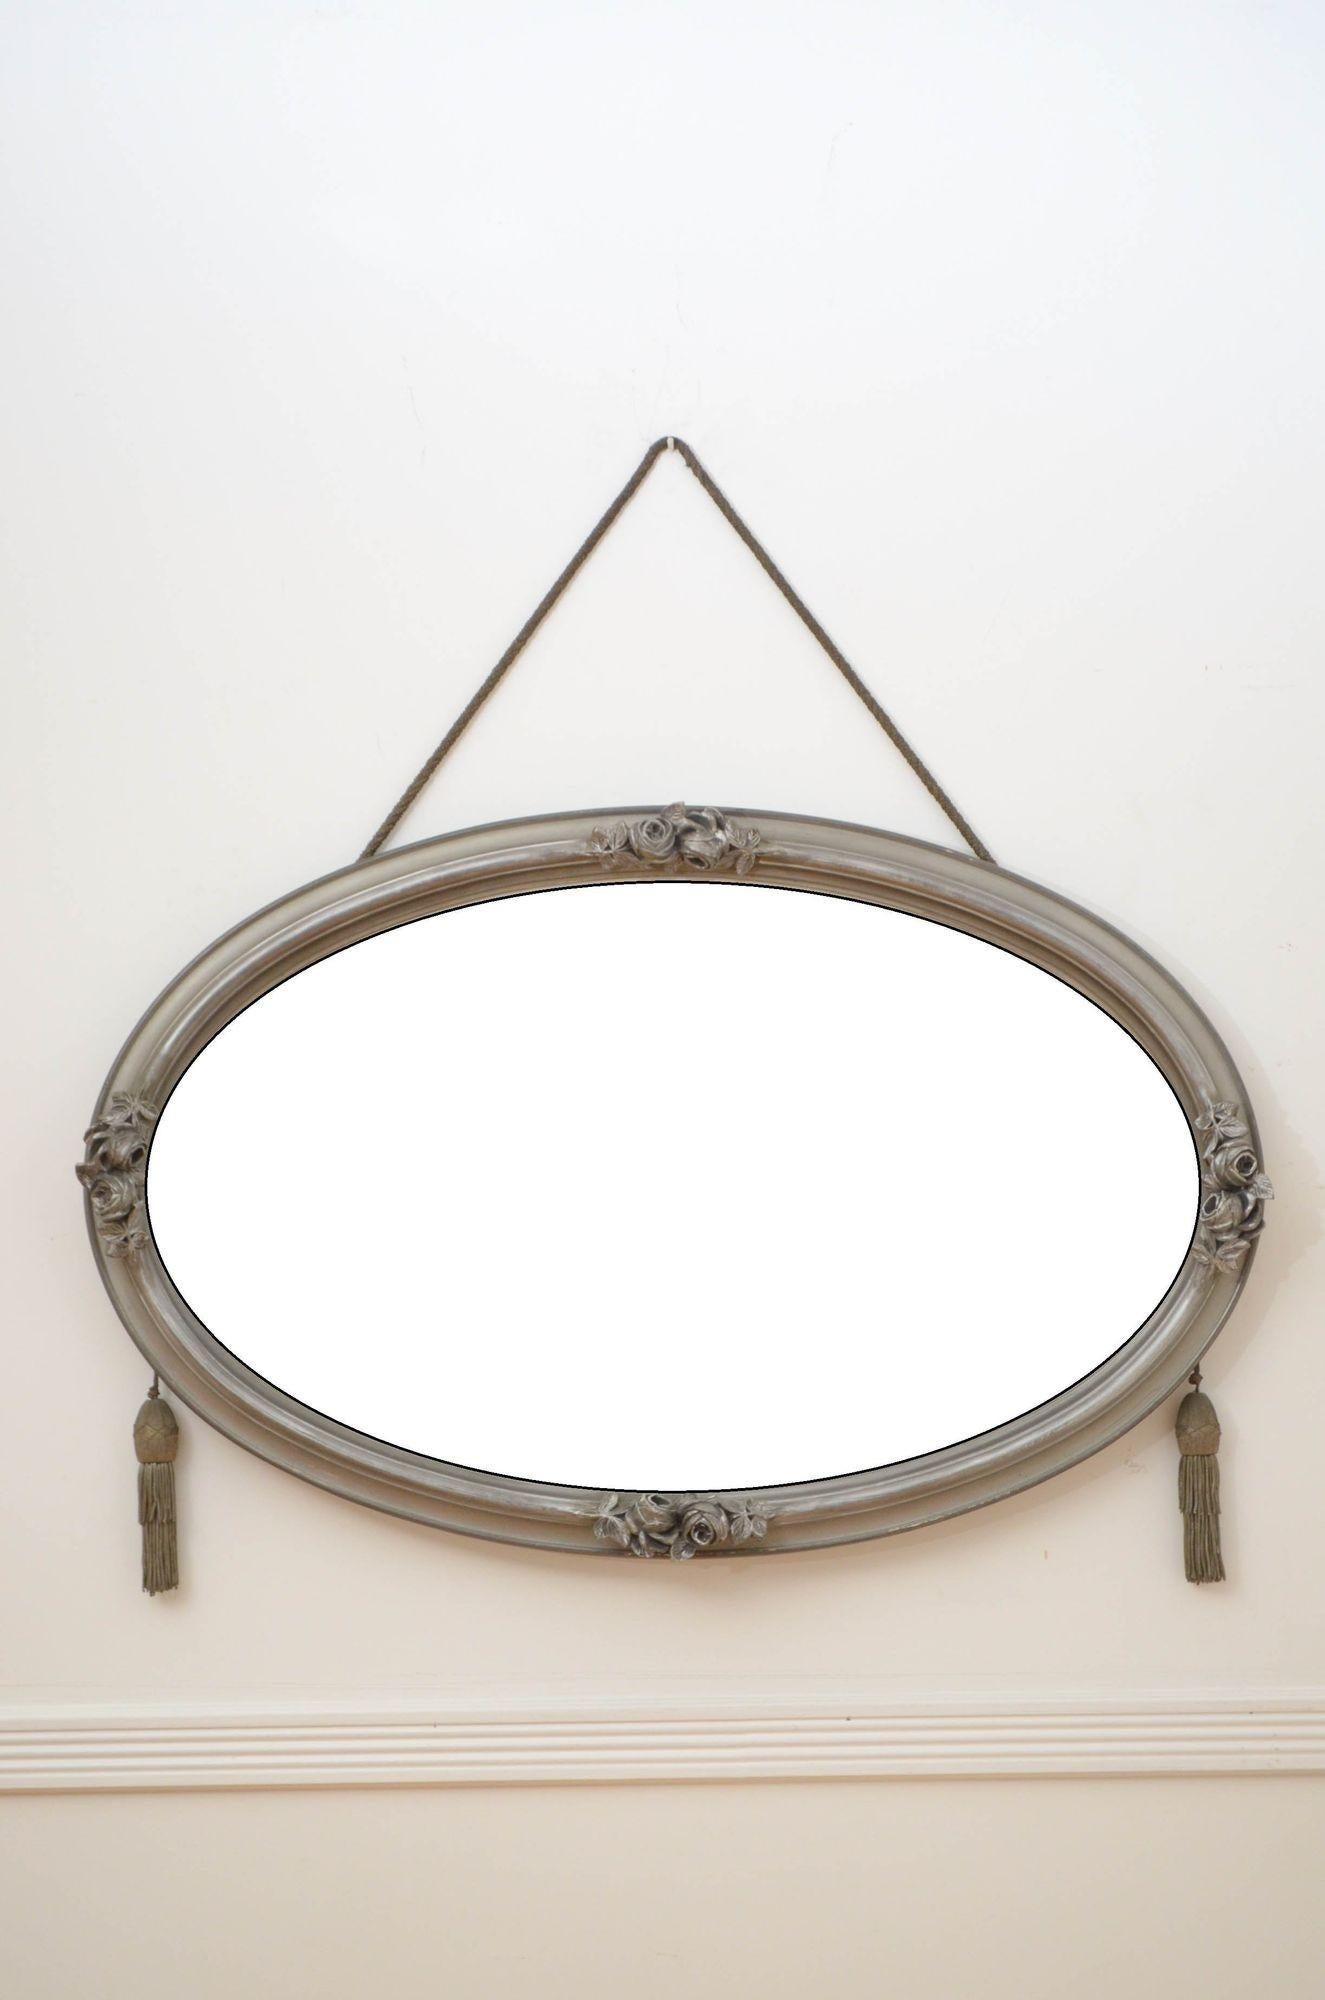 K0159 stylish Art Deco wall mirror in pewter and silver colour, having original bevelled edge glass with some foxing in moulded and flower decorated frame with original hanging rope with tassels, all in wonderful home ready condition.